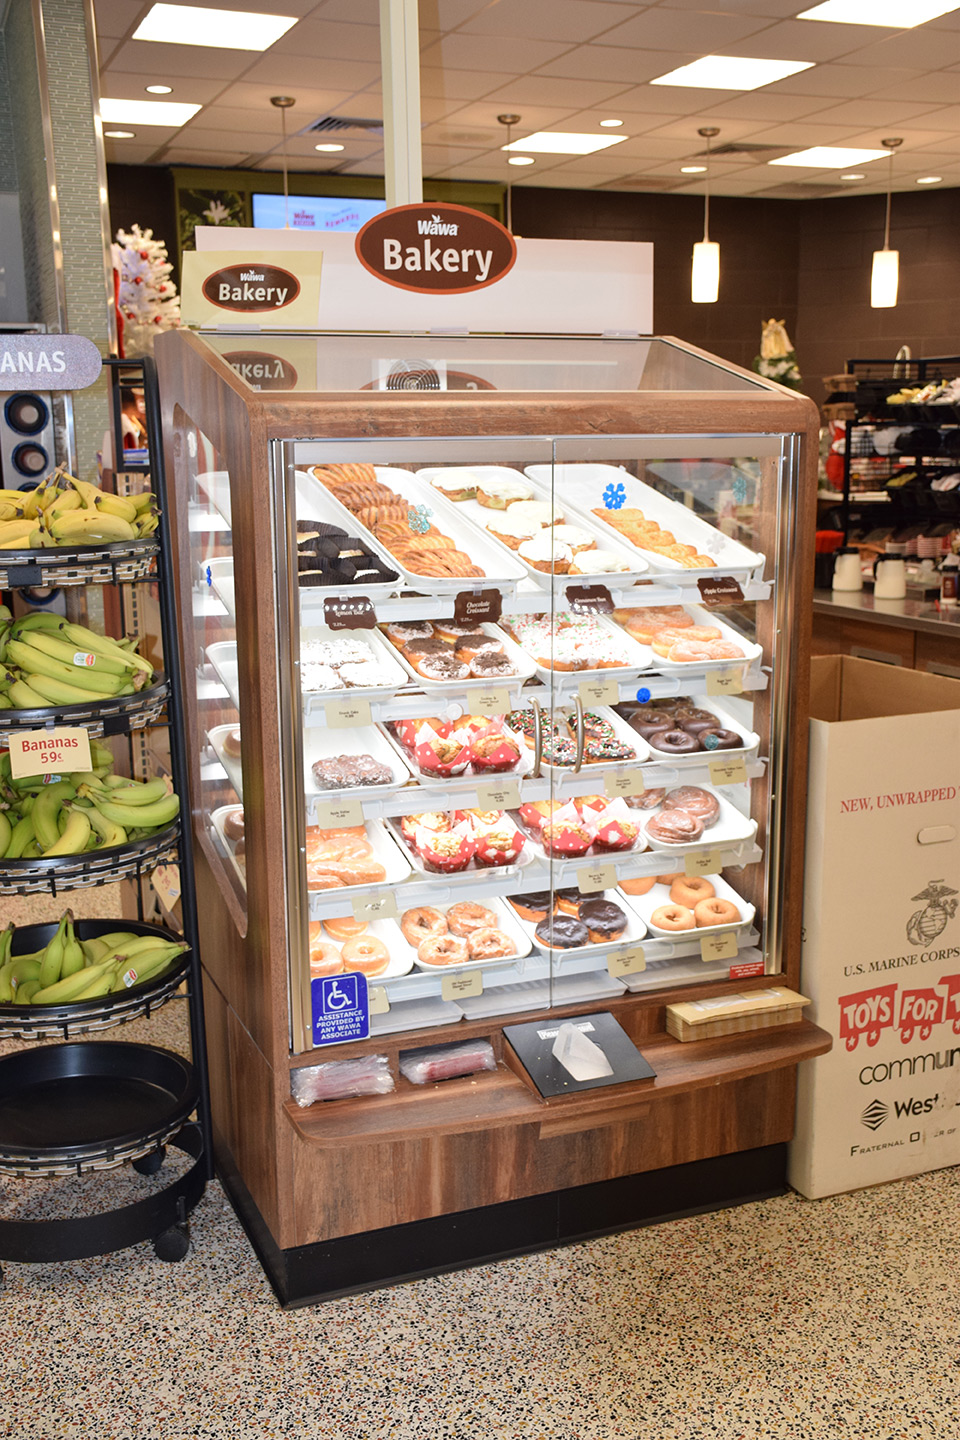 Wawa cigarette checkout area with point-of-sale candy and a breakfast sandwich display case